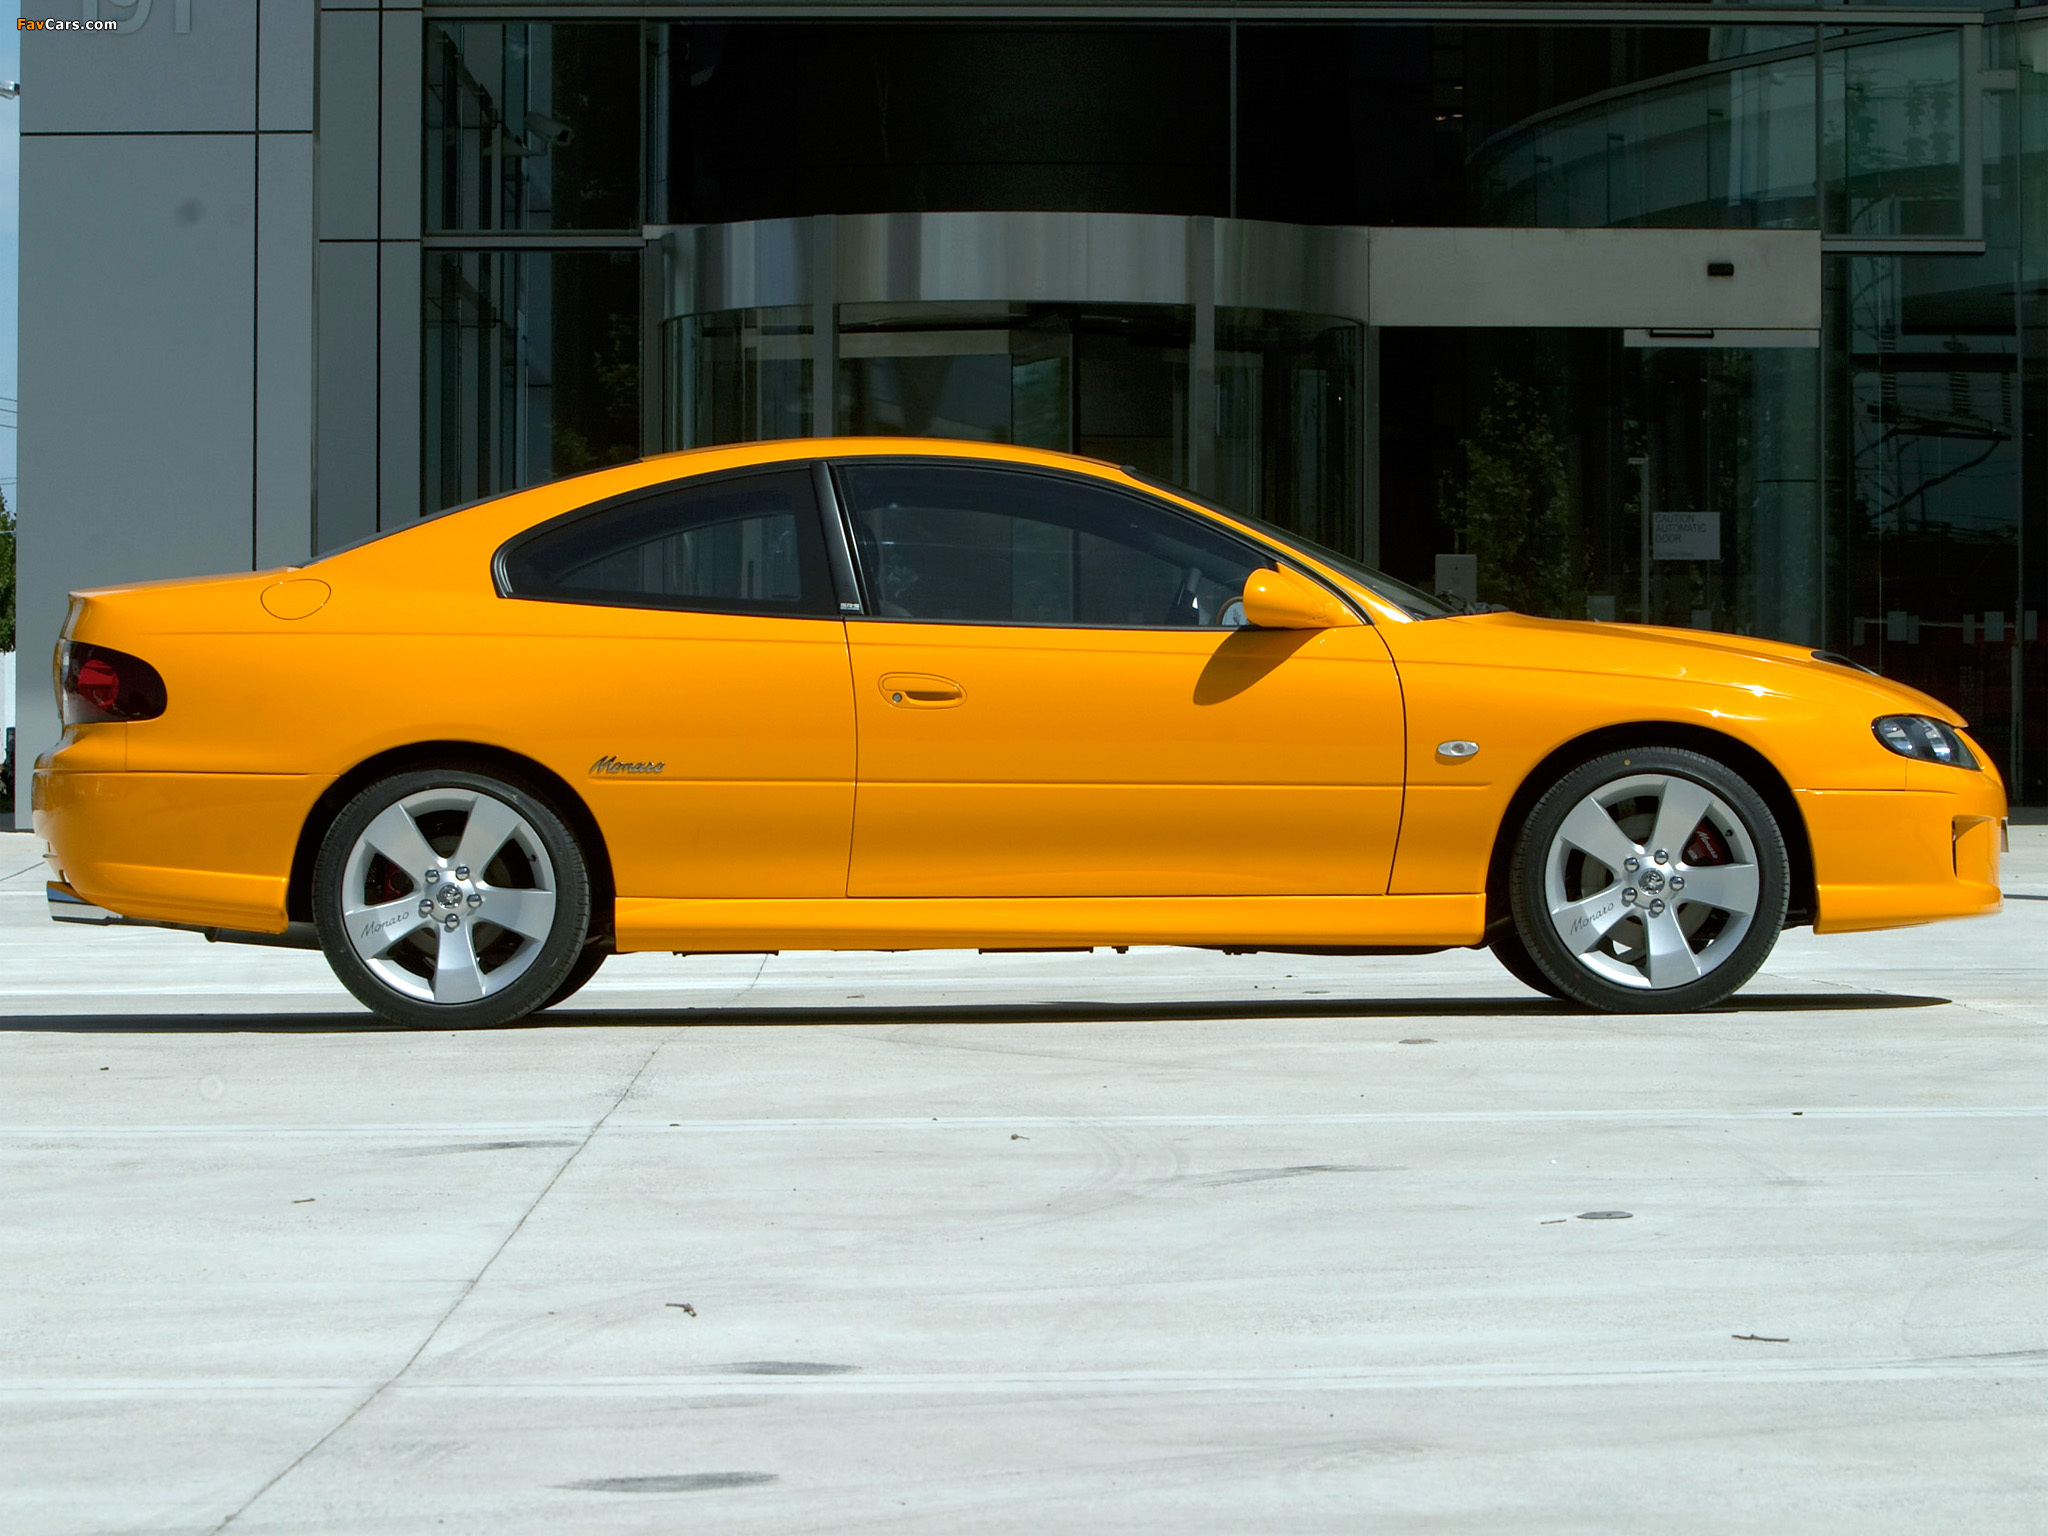 Holden Monaro CV8-Z Limited Edition 2005 wallpapers (2048 x 1536)